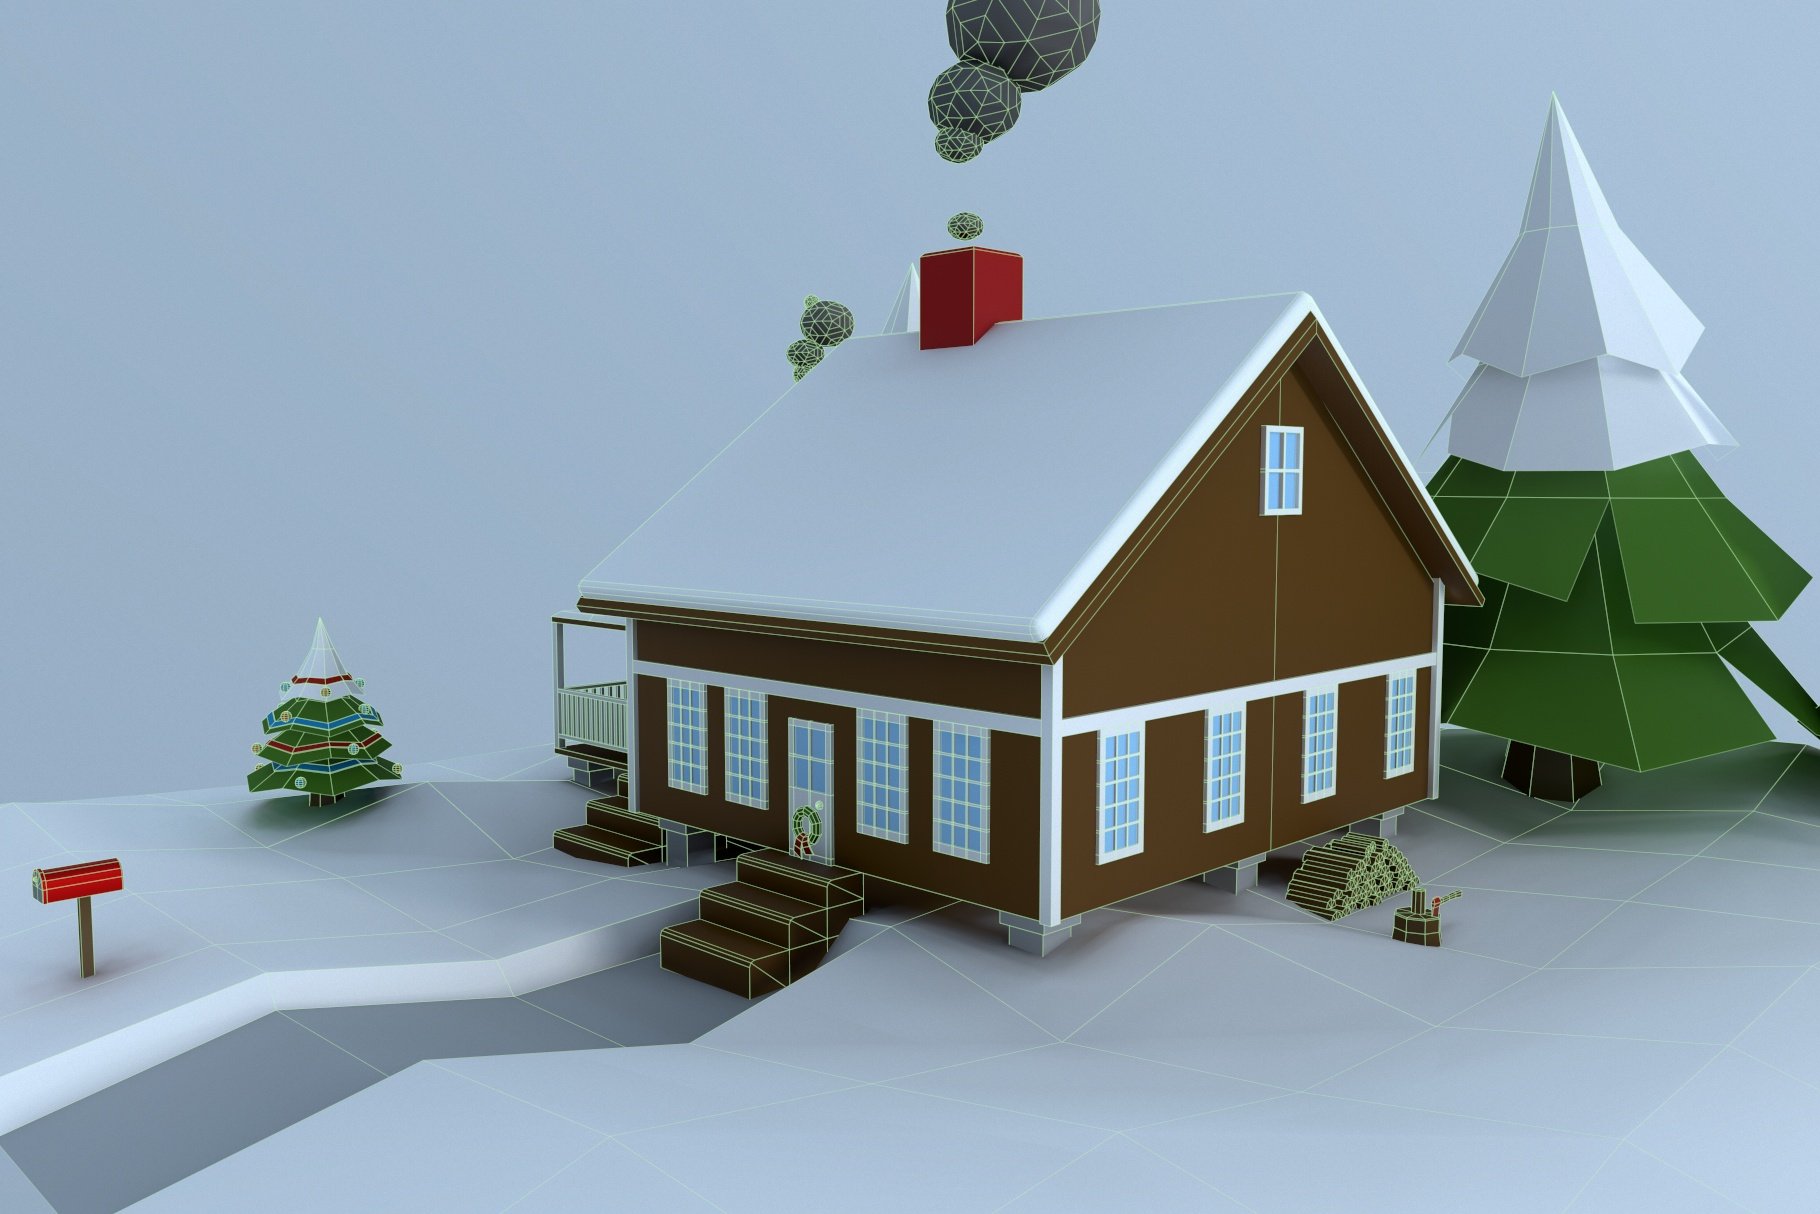 Low poly house back graphic mockup on the left side.